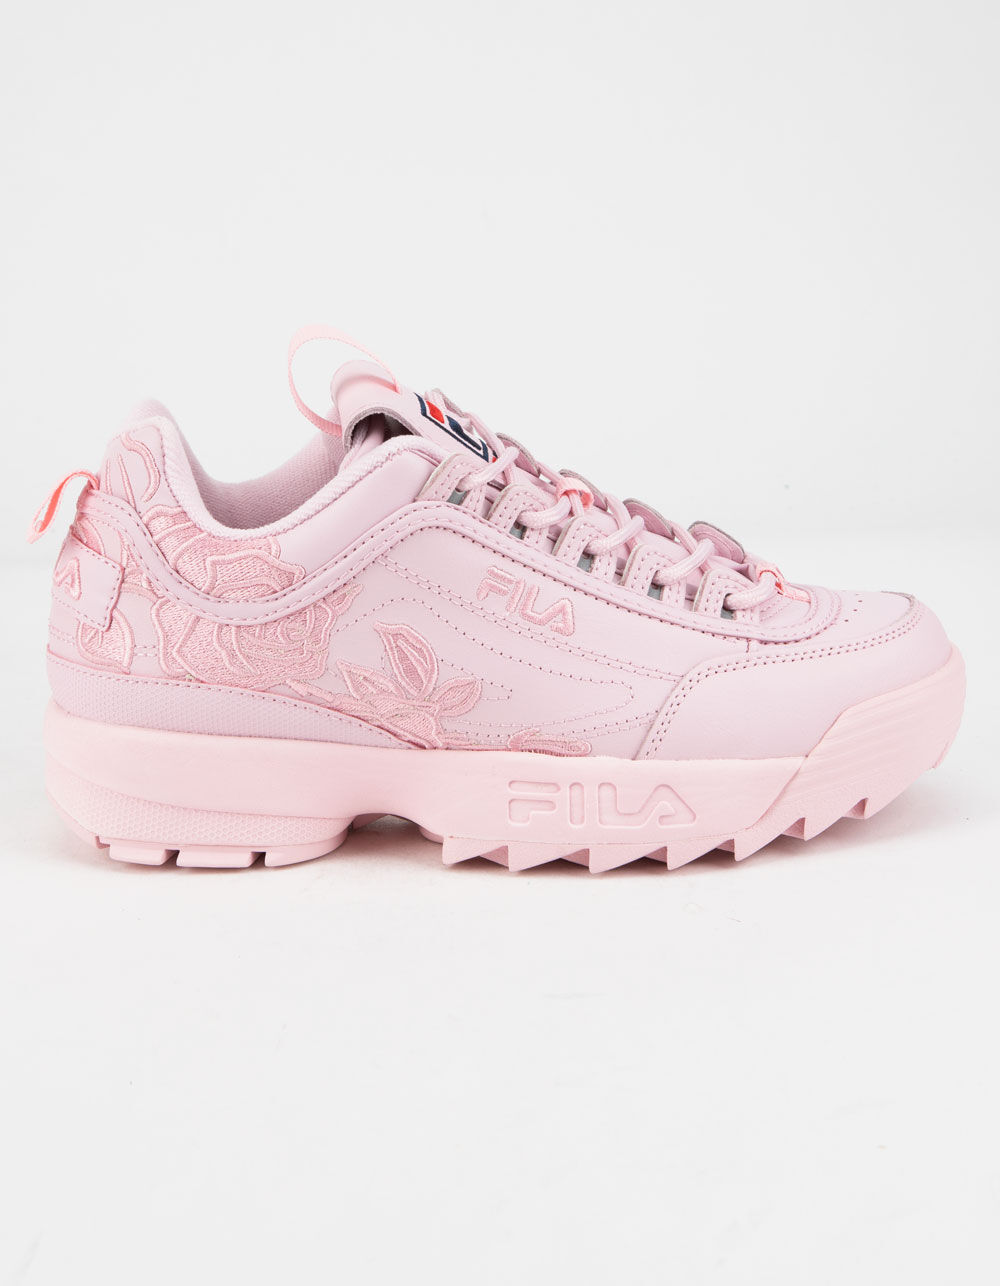 FILA Disruptor 2 Embroidery Pink Womens Shoes - PINK | Tillys